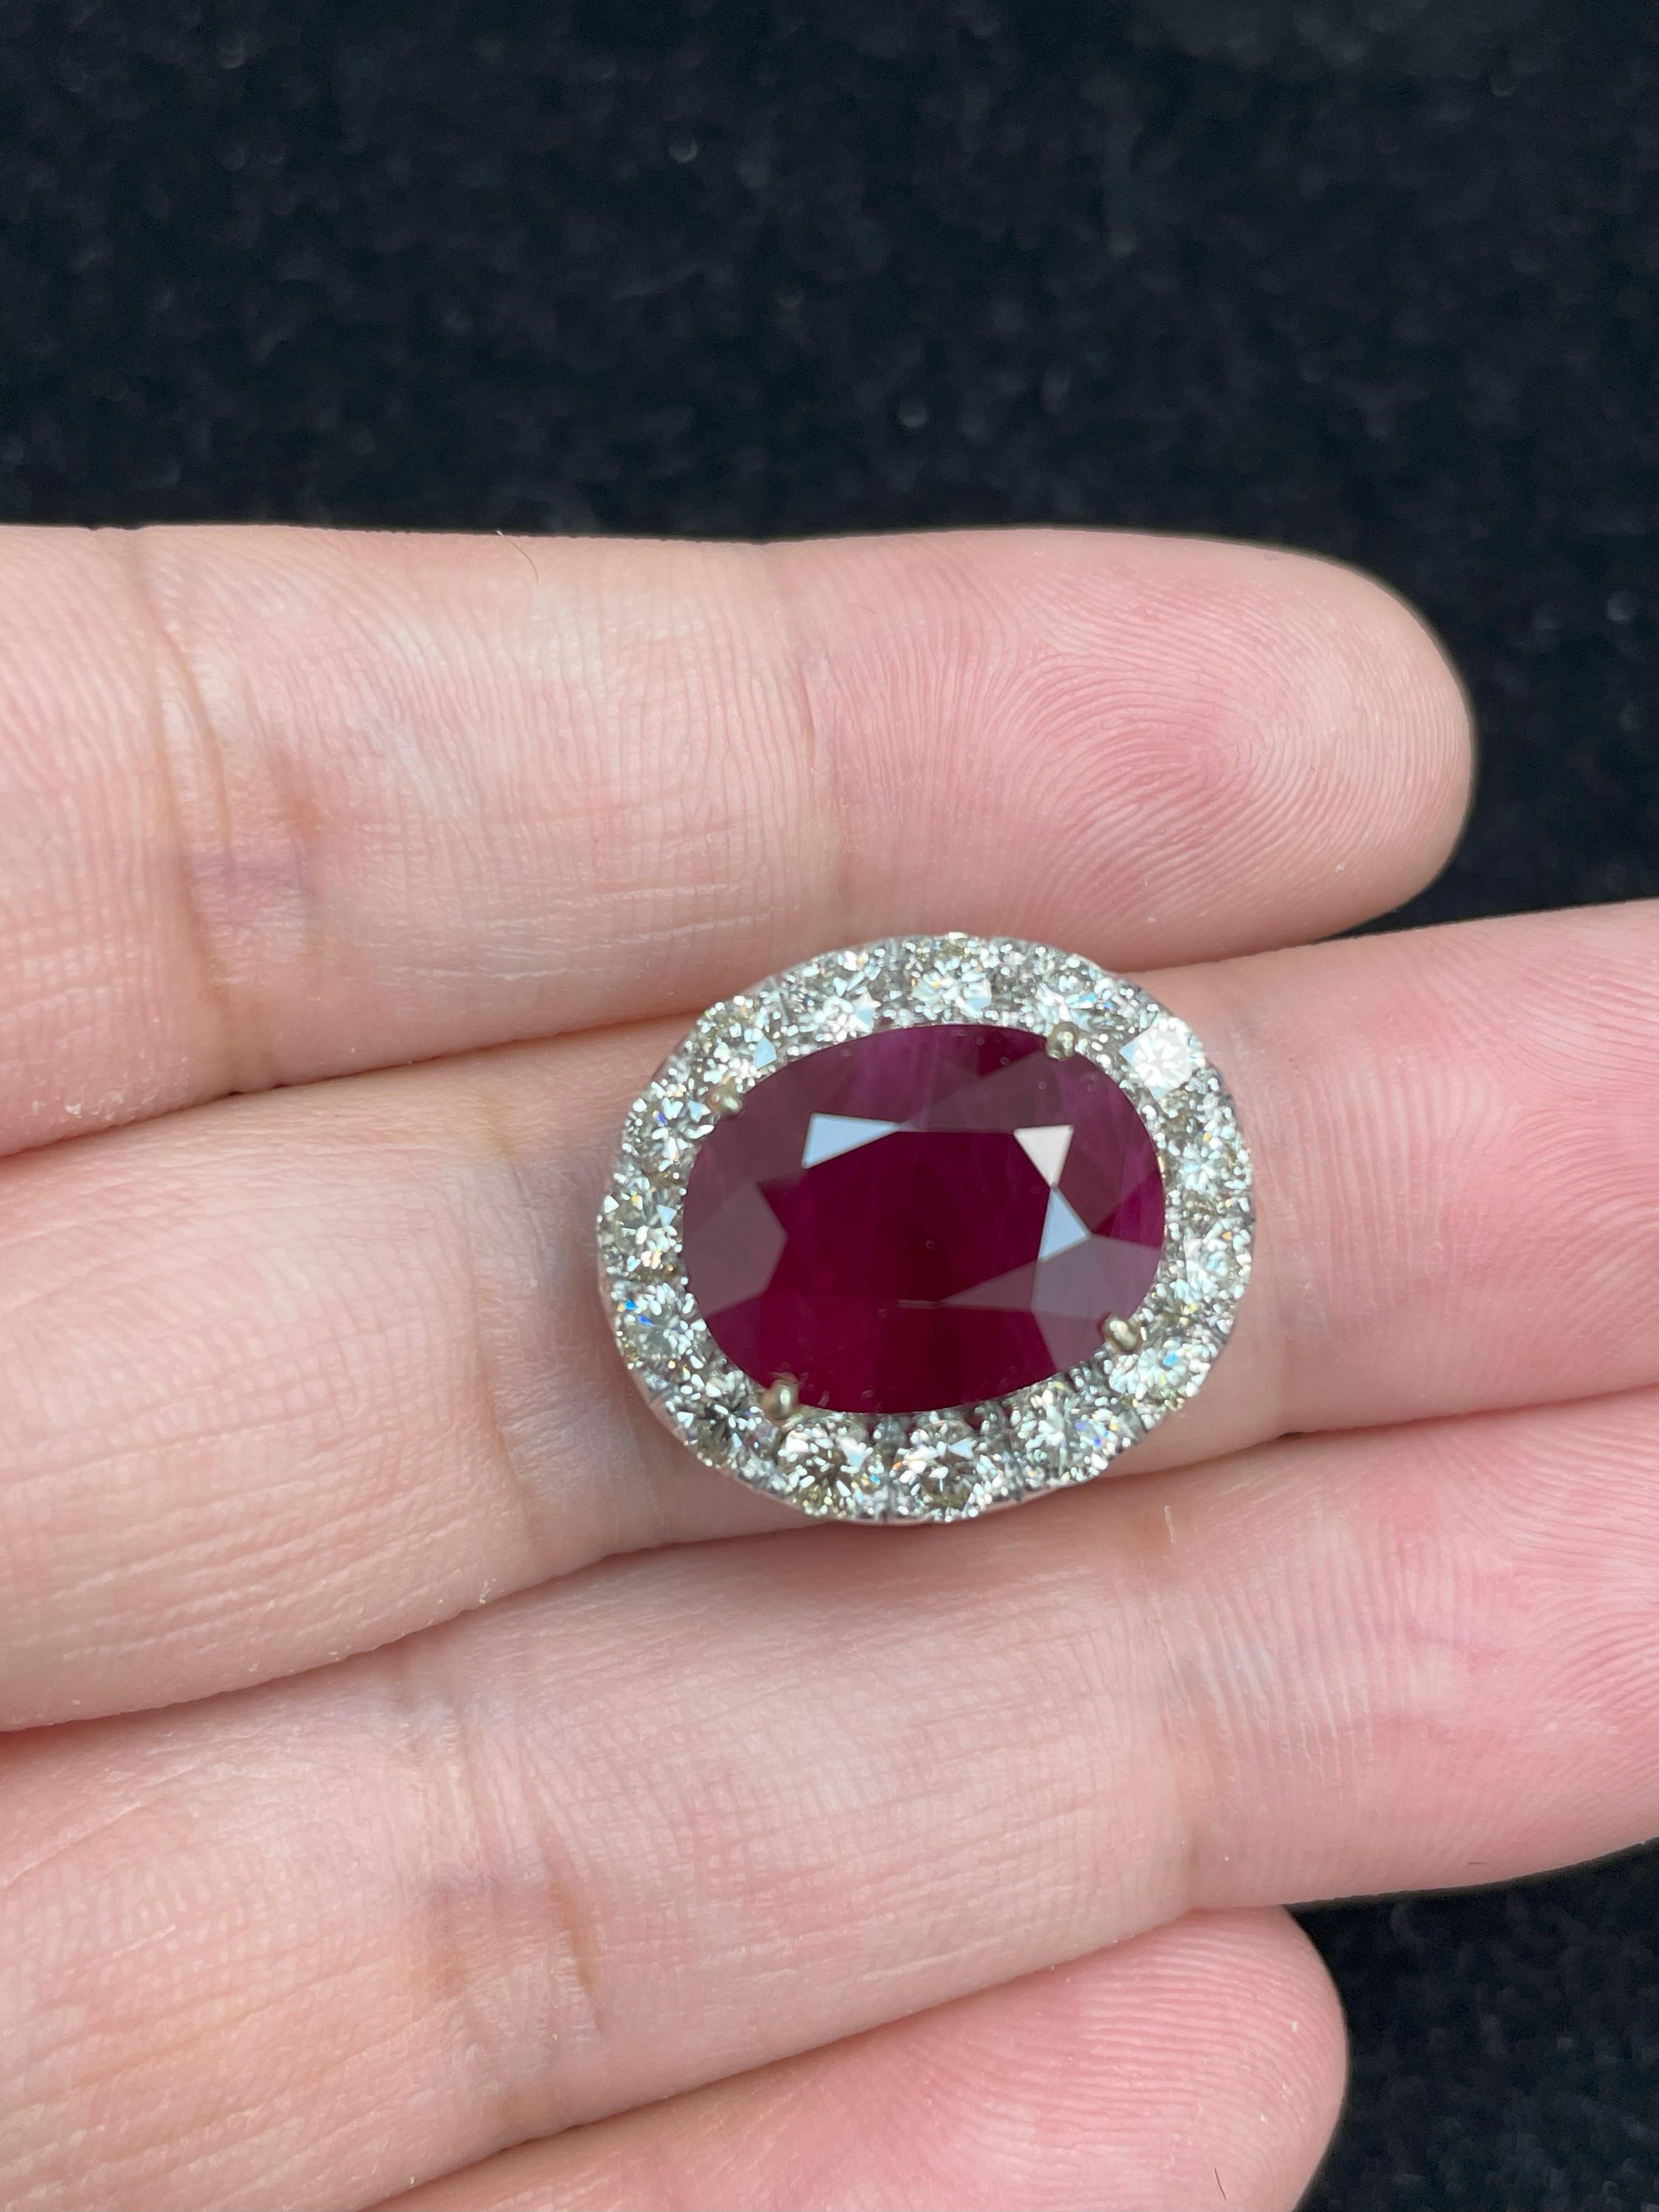 Burma (Myanmar) Ruby Cts 8.45 and Diamond Engagement Ring with GRS Certificate For Sale 1